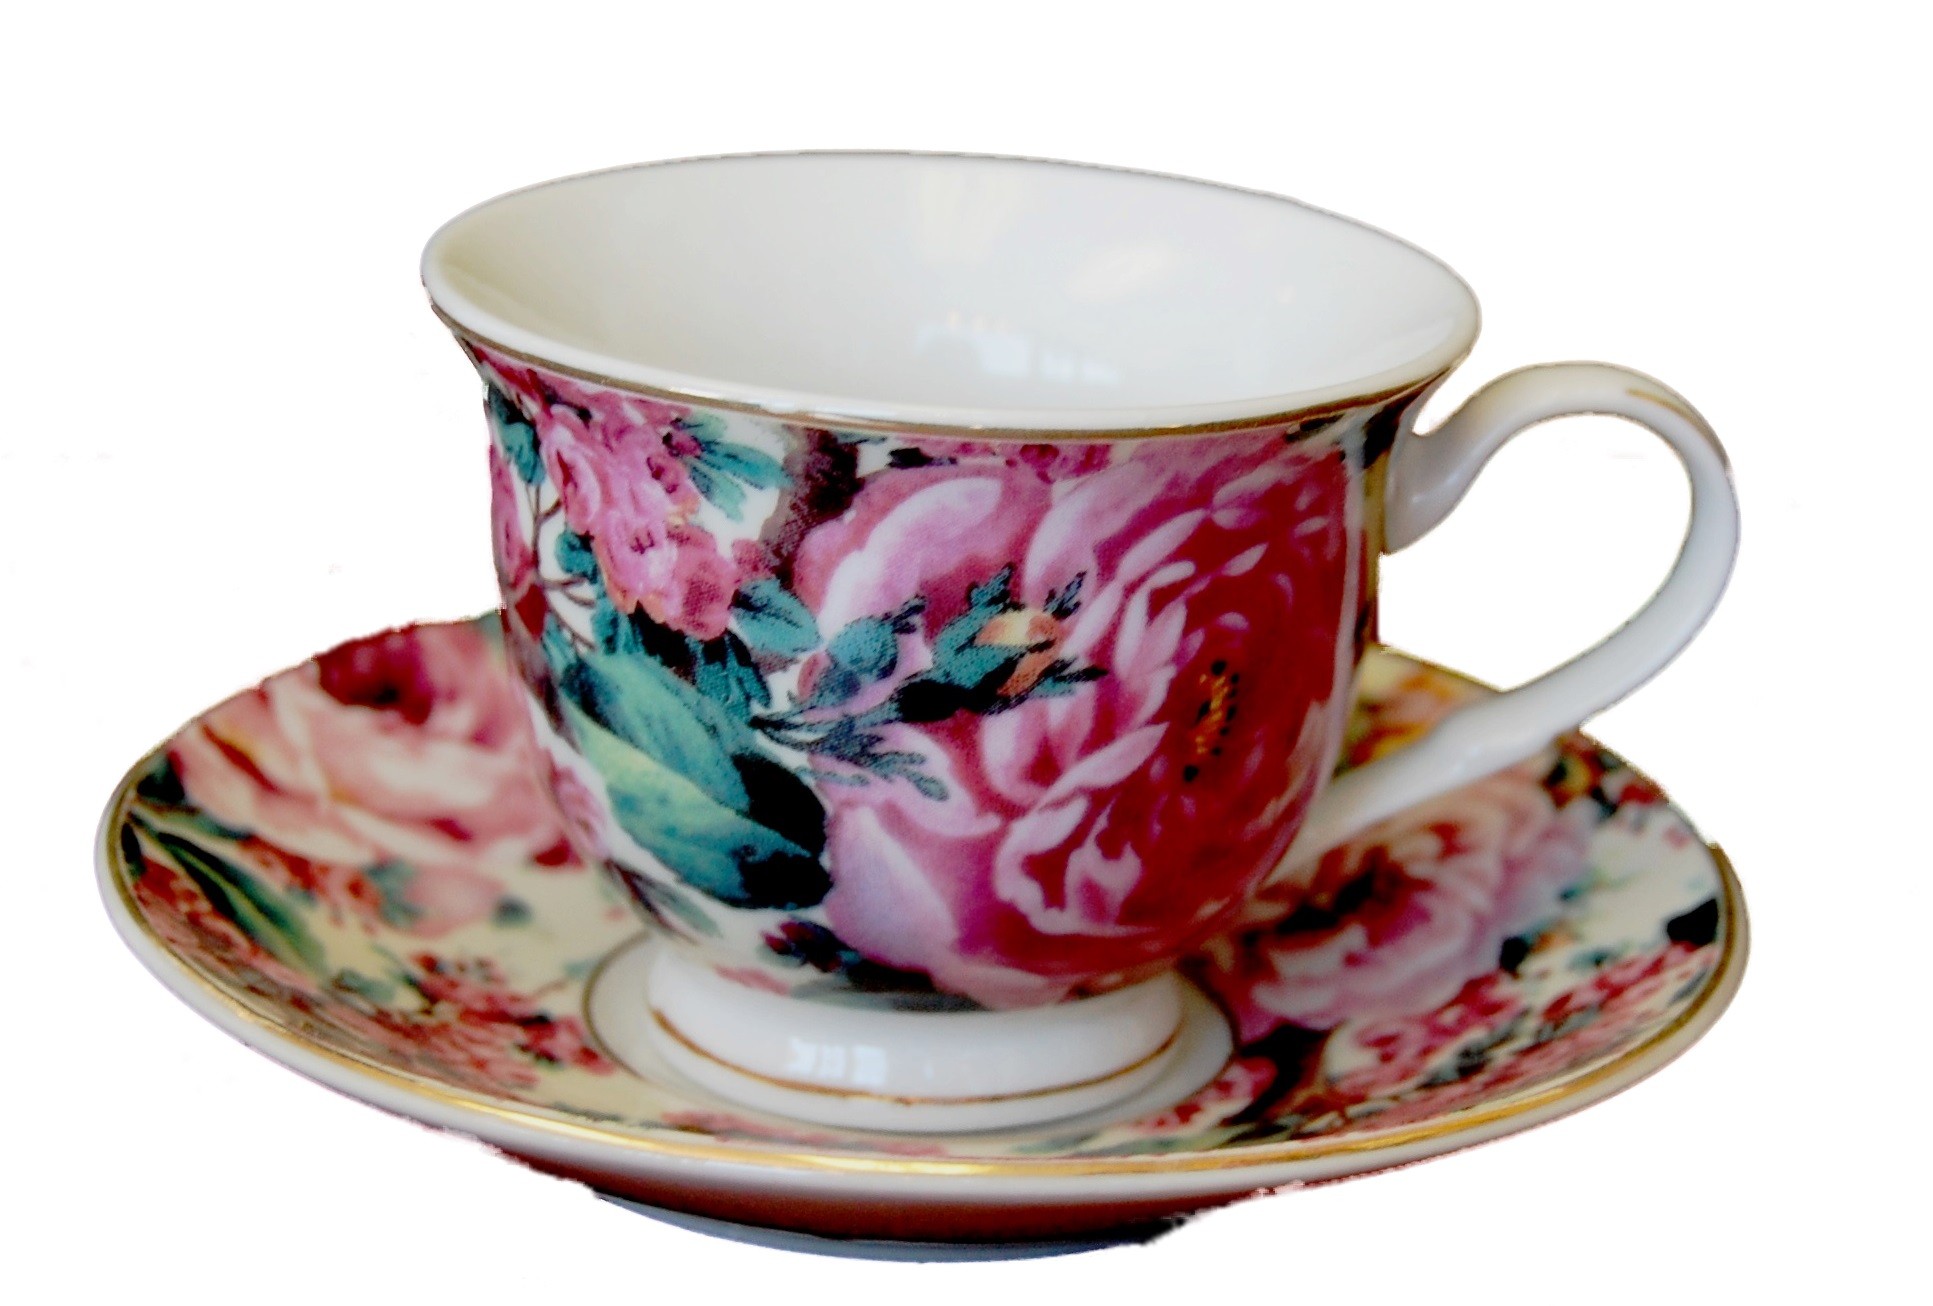 The Queen's Treasures English Rose Pattern Set of 4 Fine China Demitasse Tea Cups - Perfect for Children's Tea Parties